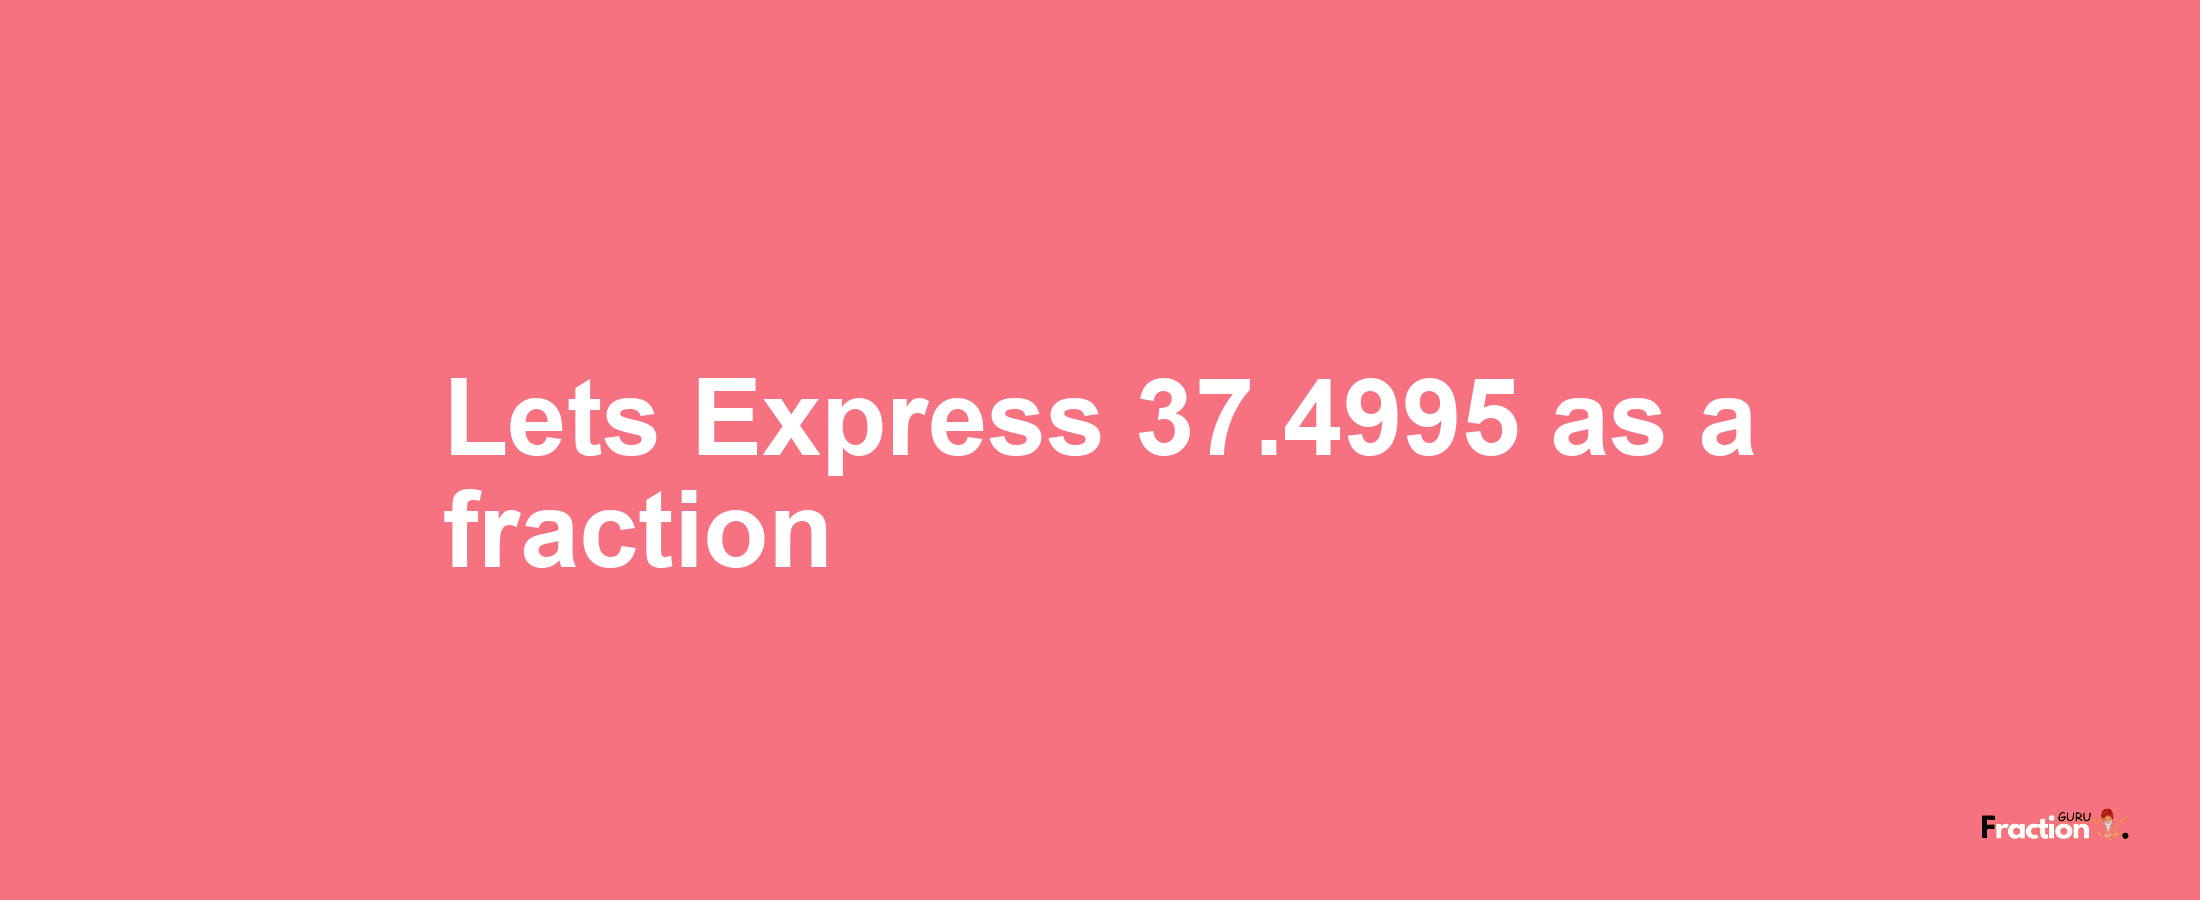 Lets Express 37.4995 as afraction